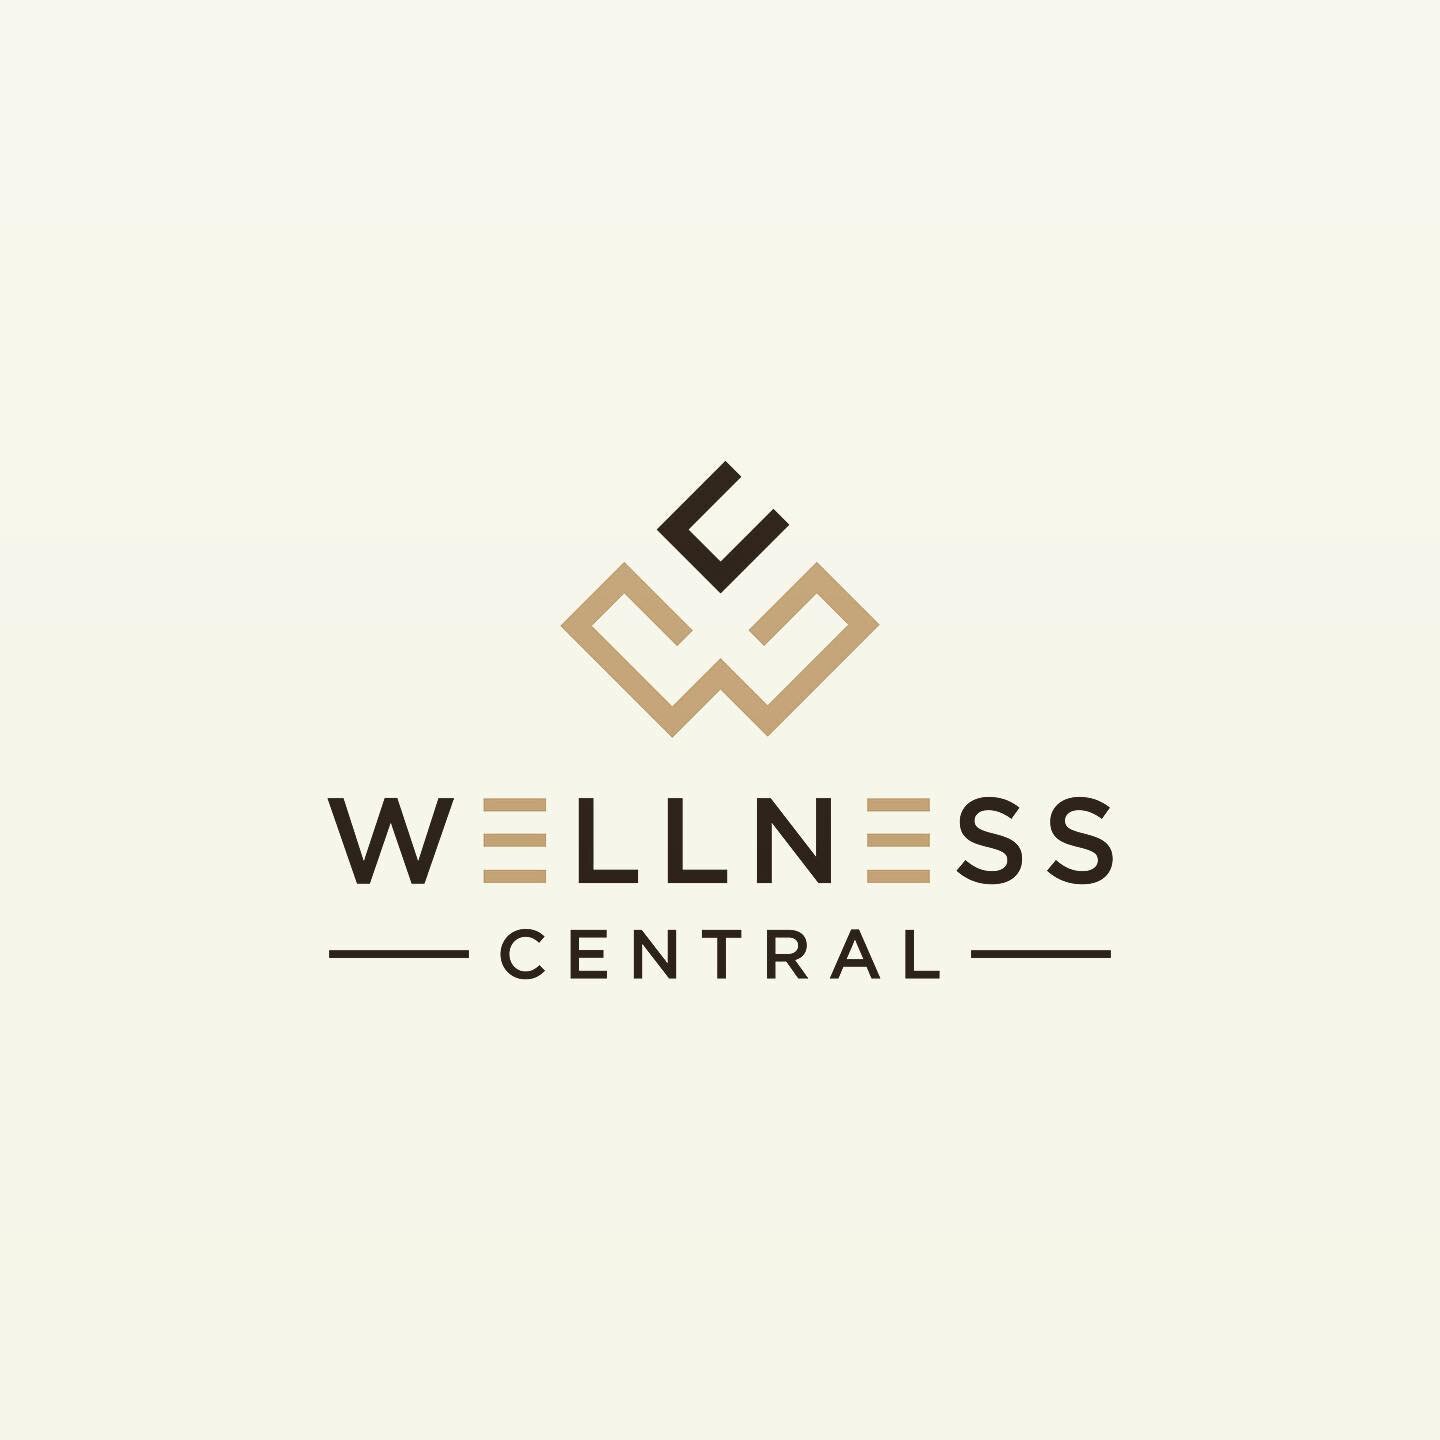 we are so excited to bring this type of wellness to the #peekskillny community!
⠀⠀⠀⠀⠀⠀⠀⠀⠀
at wellness central you&rsquo;ll be able to take your health + self-care game to the next level. 
⠀⠀⠀⠀⠀⠀⠀⠀⠀
➕ reset your nervous system in one of our sensory de